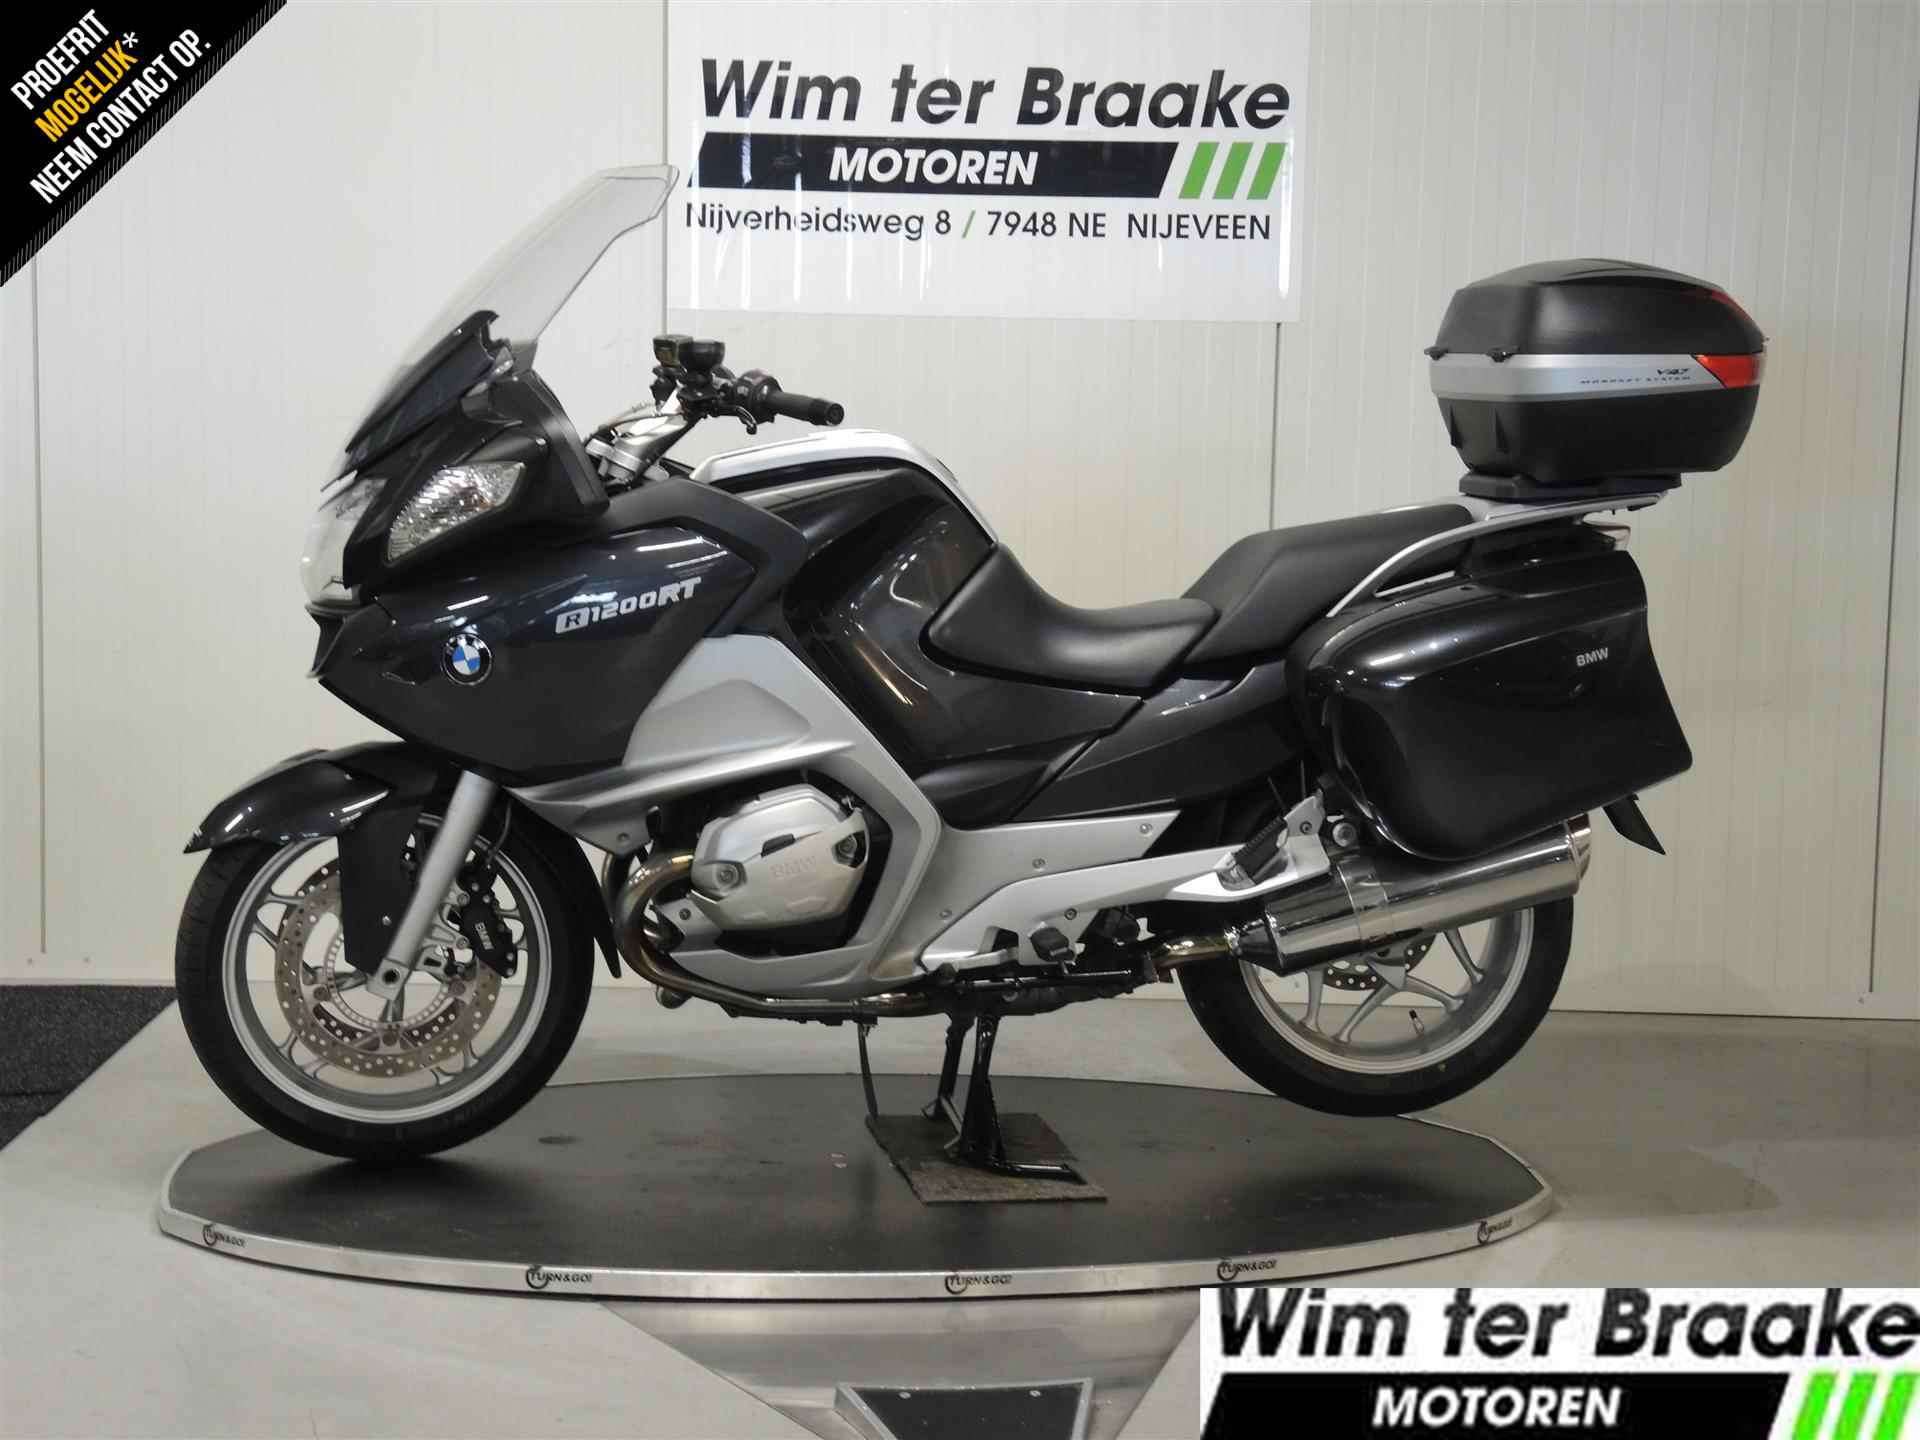 BMW R 1200 RT ABS - 1/11